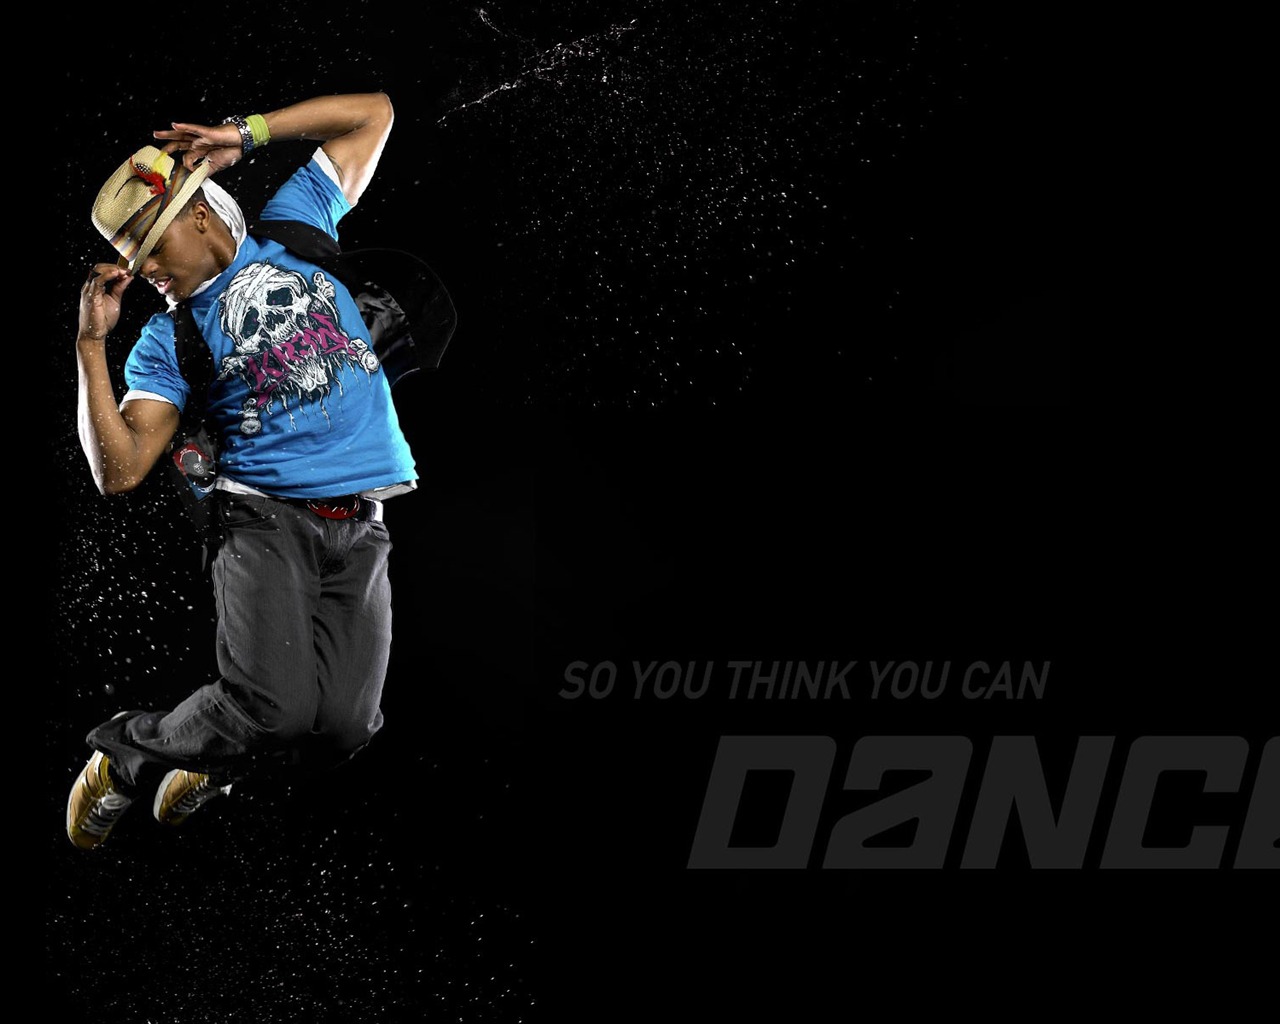 So You Think You Can Dance 舞林争霸 壁纸(一)20 - 1280x1024